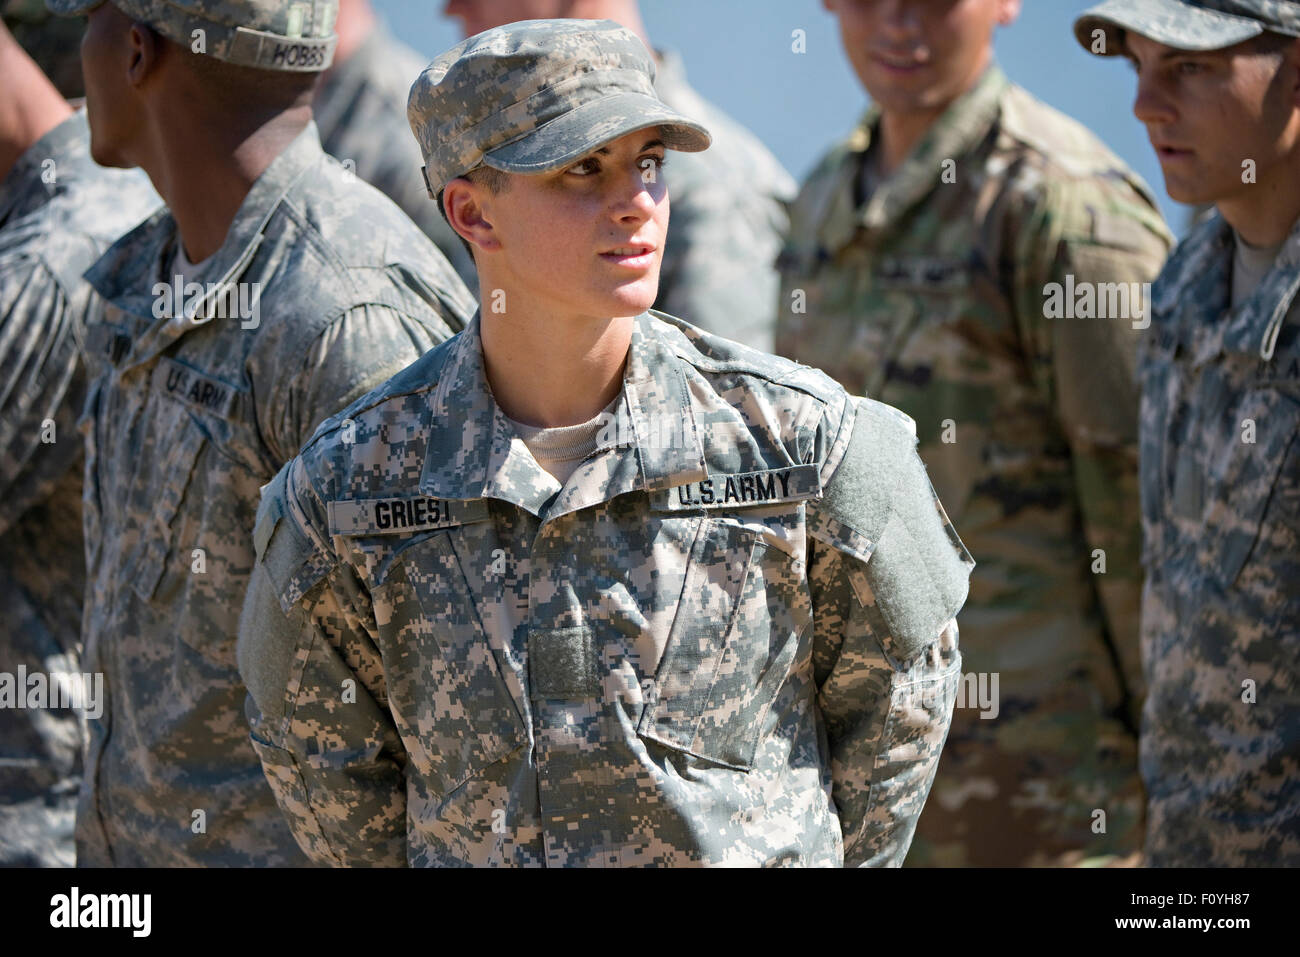 U.S. Army Captain Kristen Griest during graduation ceremonies at the Army Ranger school August 21, 2015 at Fort Benning, Georgia. Griest and fellow soldier 1st Lt. Shaye Haver became the first women to graduate from the 61-day-long Ranger course considered one of the most intense and demanding in the military. Stock Photo